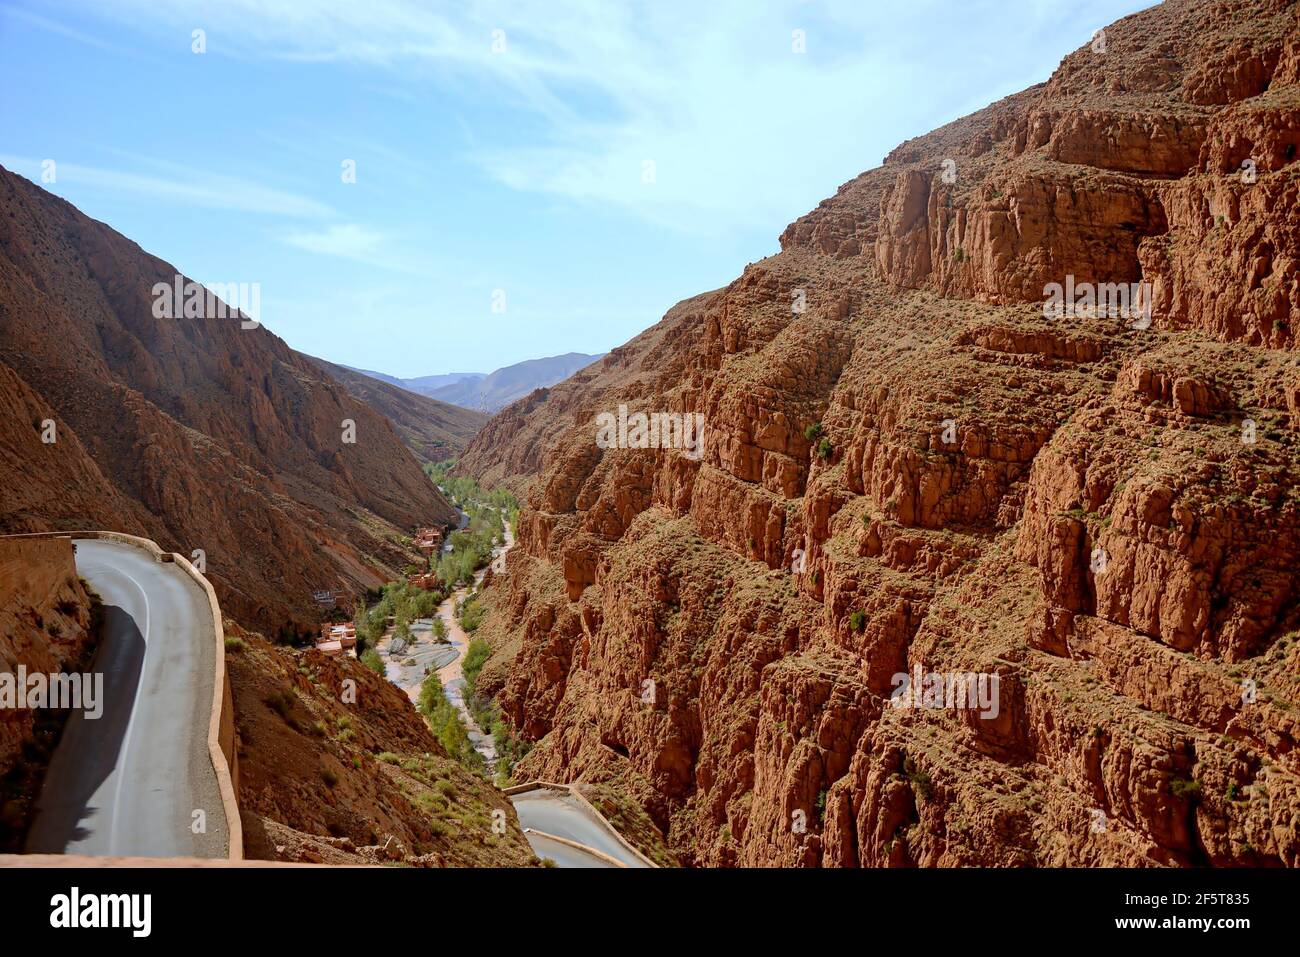 Located in the central Atlas massif, the Dades gorges reveal a breathtaking landscape: dizzying walls with ocher, red hues, green vegetation, villages Stock Photo